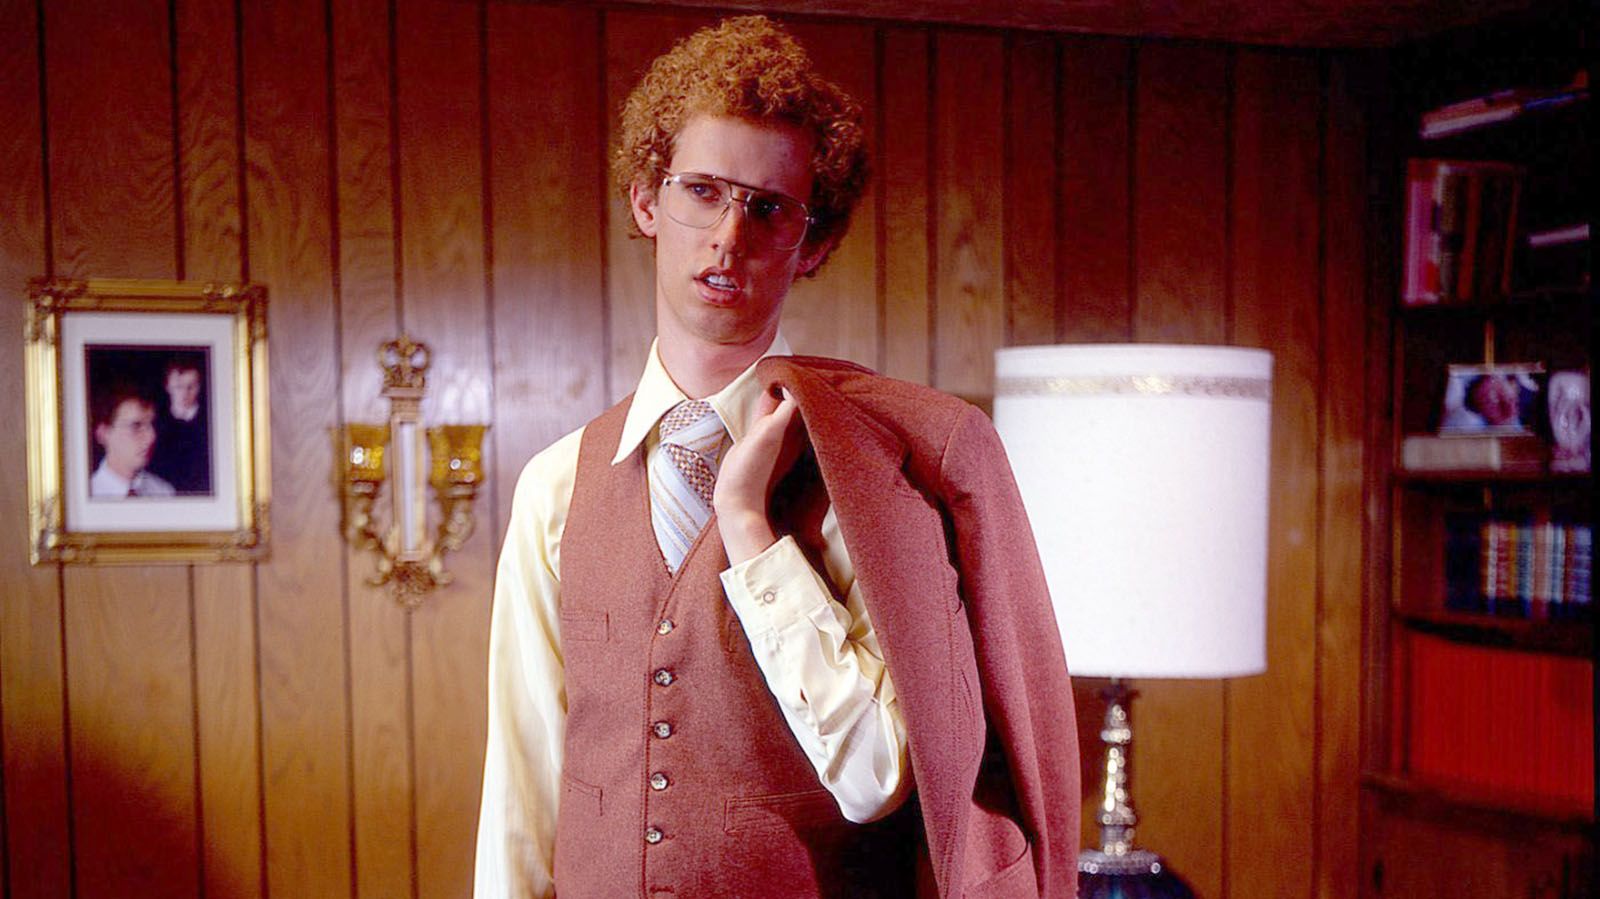 Jon Heder will be on hand for a screening of "Napoleon Dynamite" at Embassy Theatre on May 18.